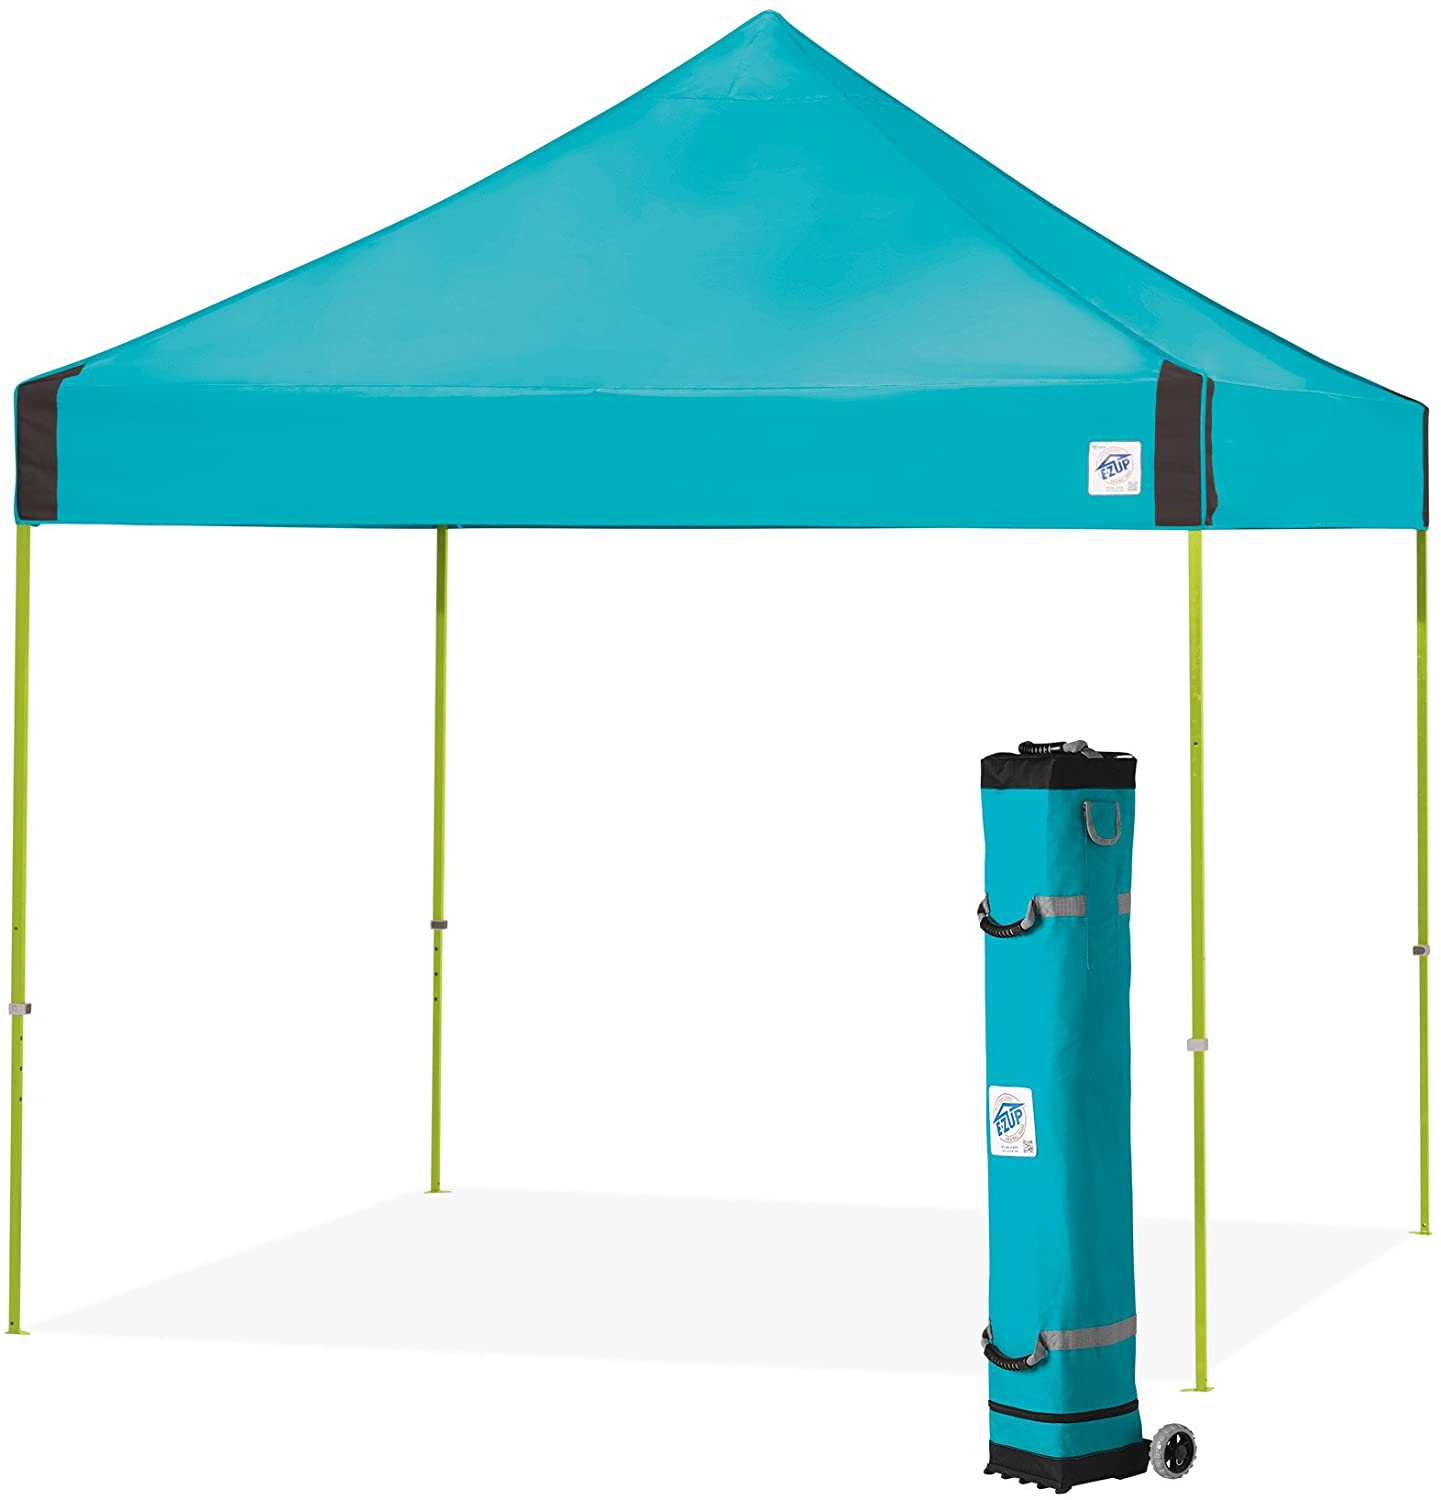 Most Reliable Pop Up Gazebo